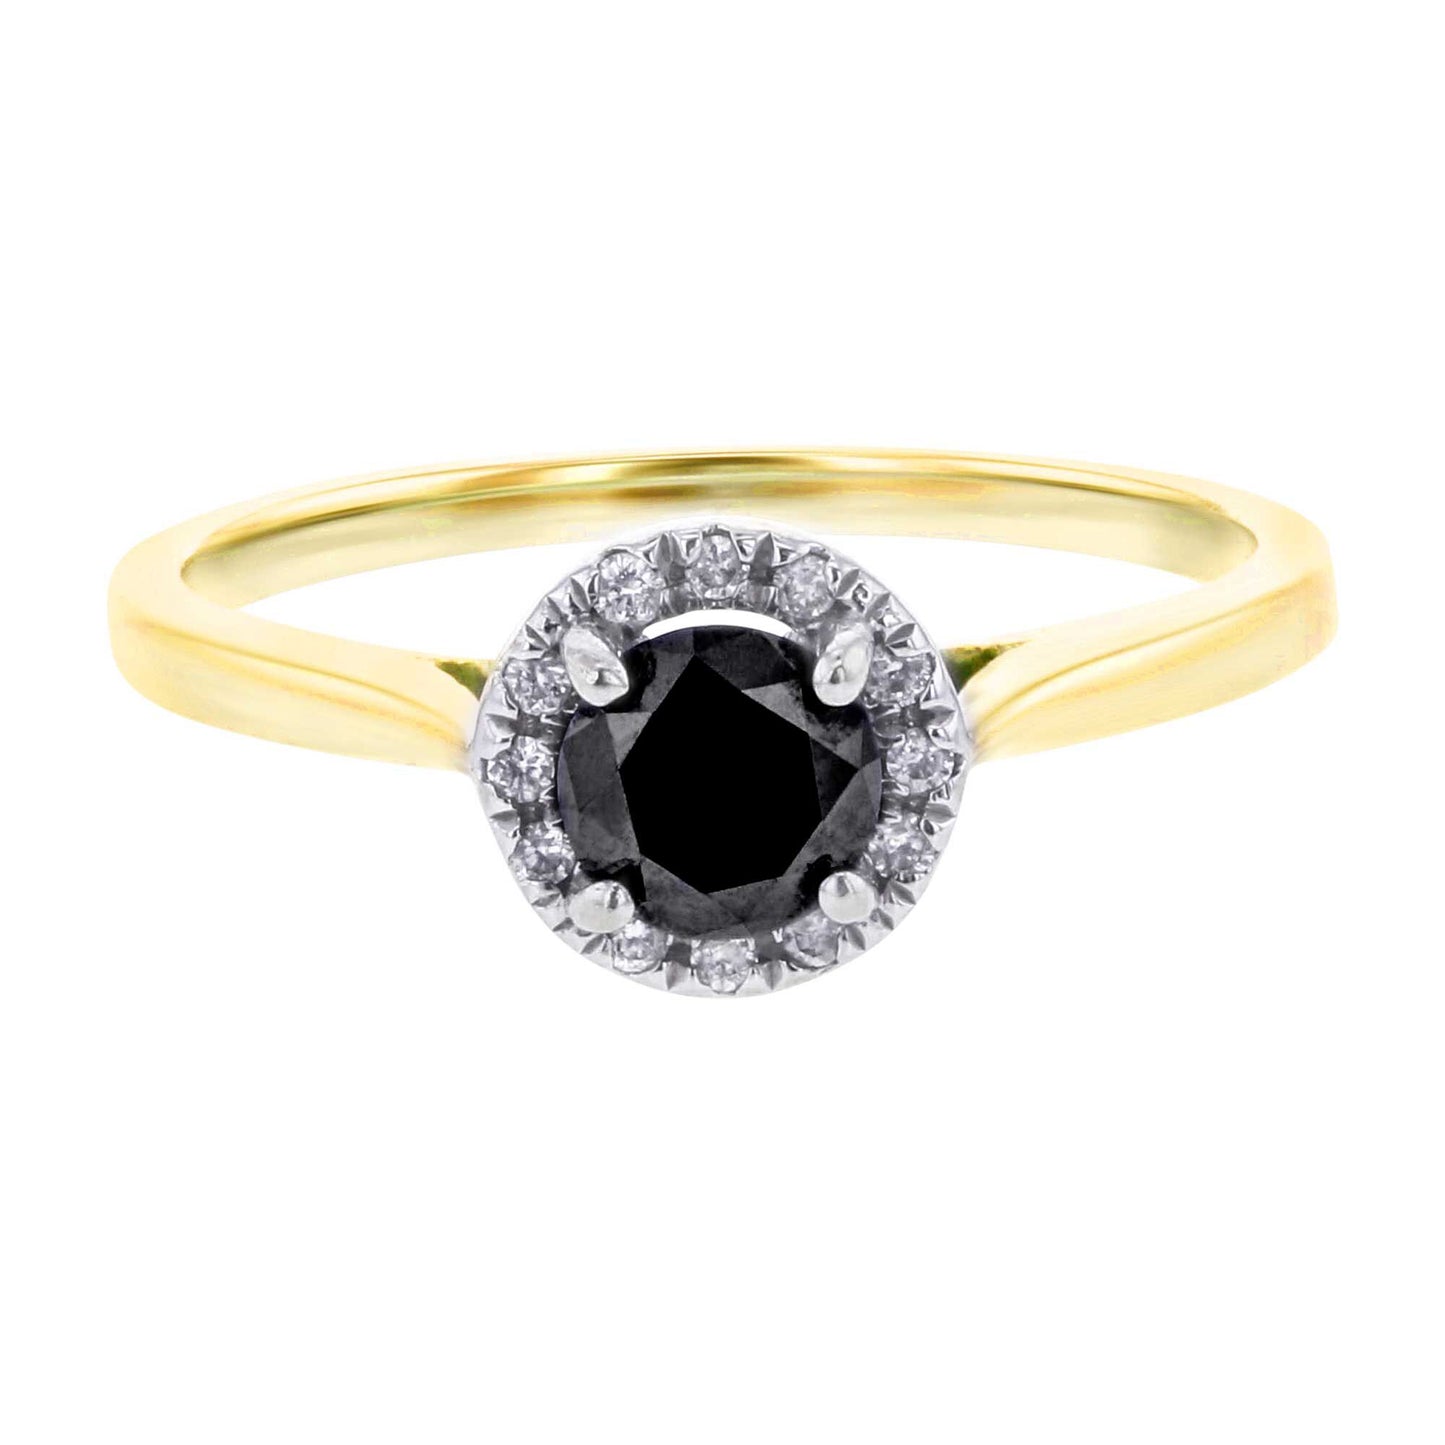 Morticia Ready for Love Diamond Engagement Ring 1/2ct